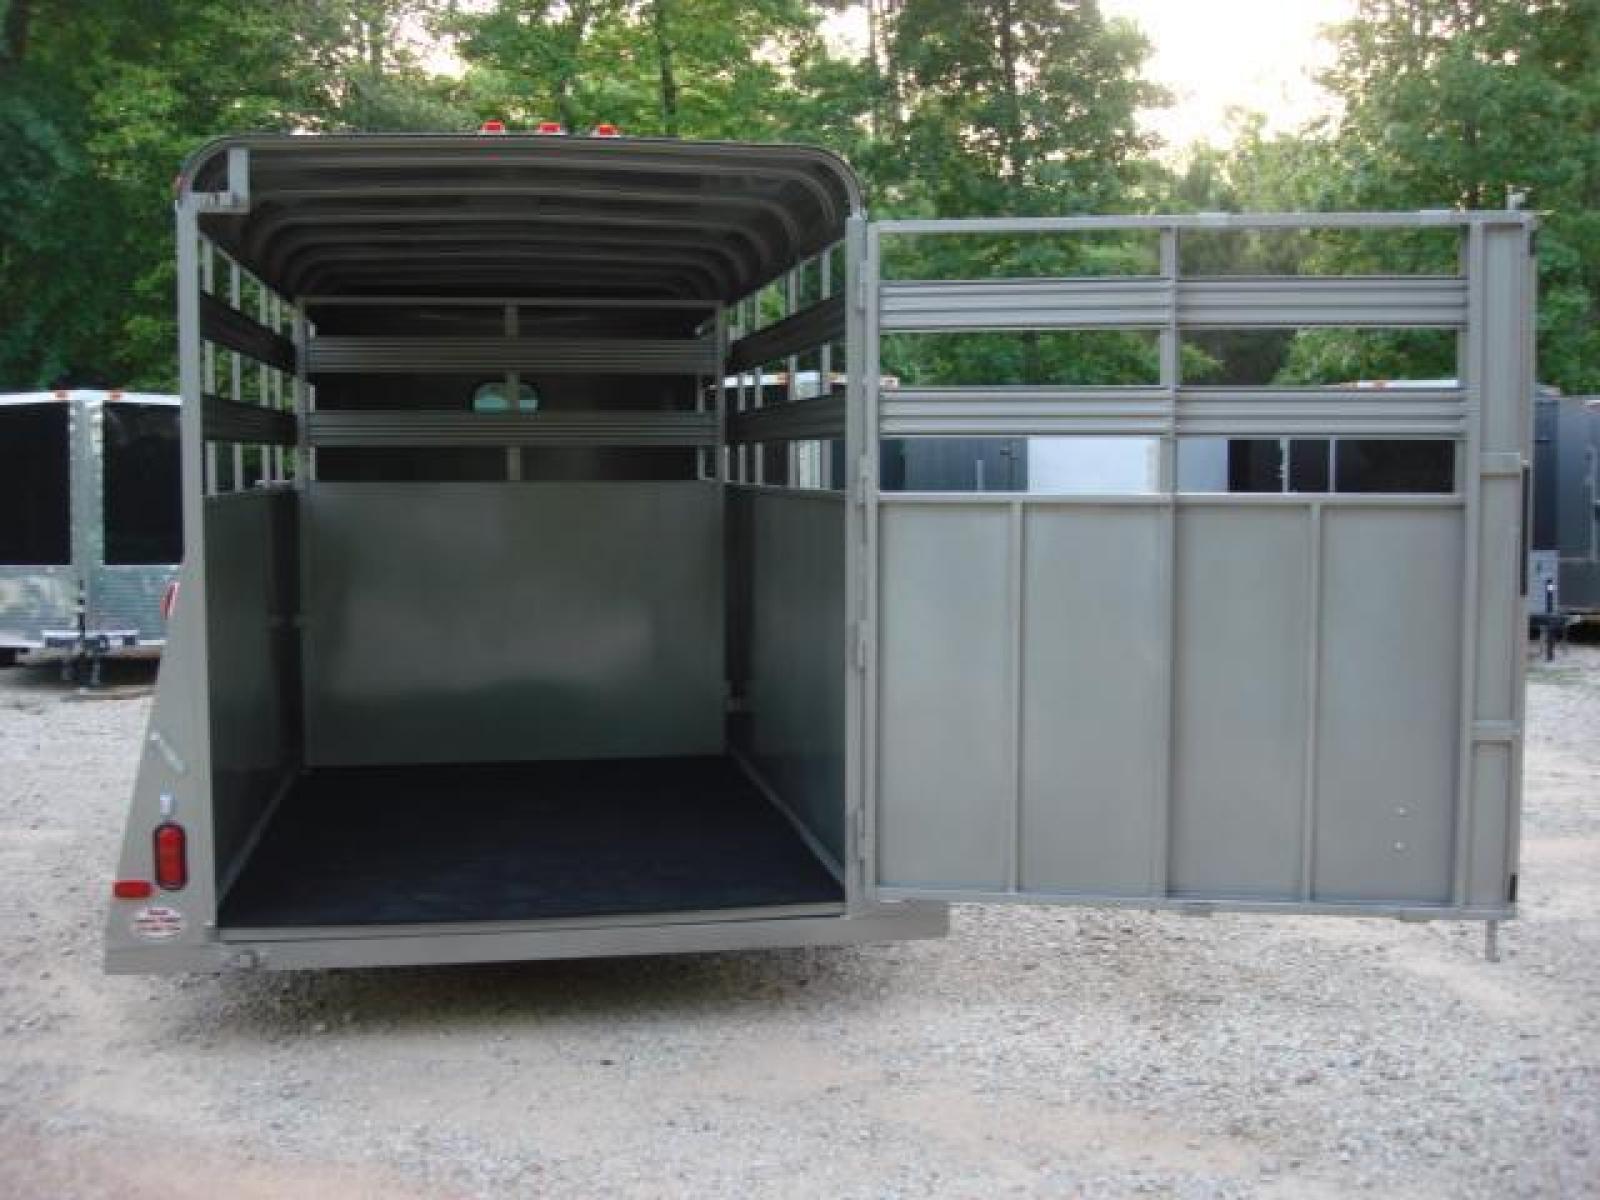 2022 Pewter Metallic! Bee Trailers Horse & Livestock , located at 1330 Rainey Rd., Macon, 31220, (478) 960-1044, 32.845638, -83.778687 - This Trailer is on Order Now! Brand New 4 Horse & Livestock Trailer 7ft Tall with Mats Made by Bee Trailers, in South, Georgia! Haul Up to 4 Horses in Style! 7ft Tall Interior Height for Hauling Horses, Cows, Goats, Pigs, Sheep, Whatever! 6ft X 16ft is the Perfect Size. Haul All Your Animals W - Photo #4